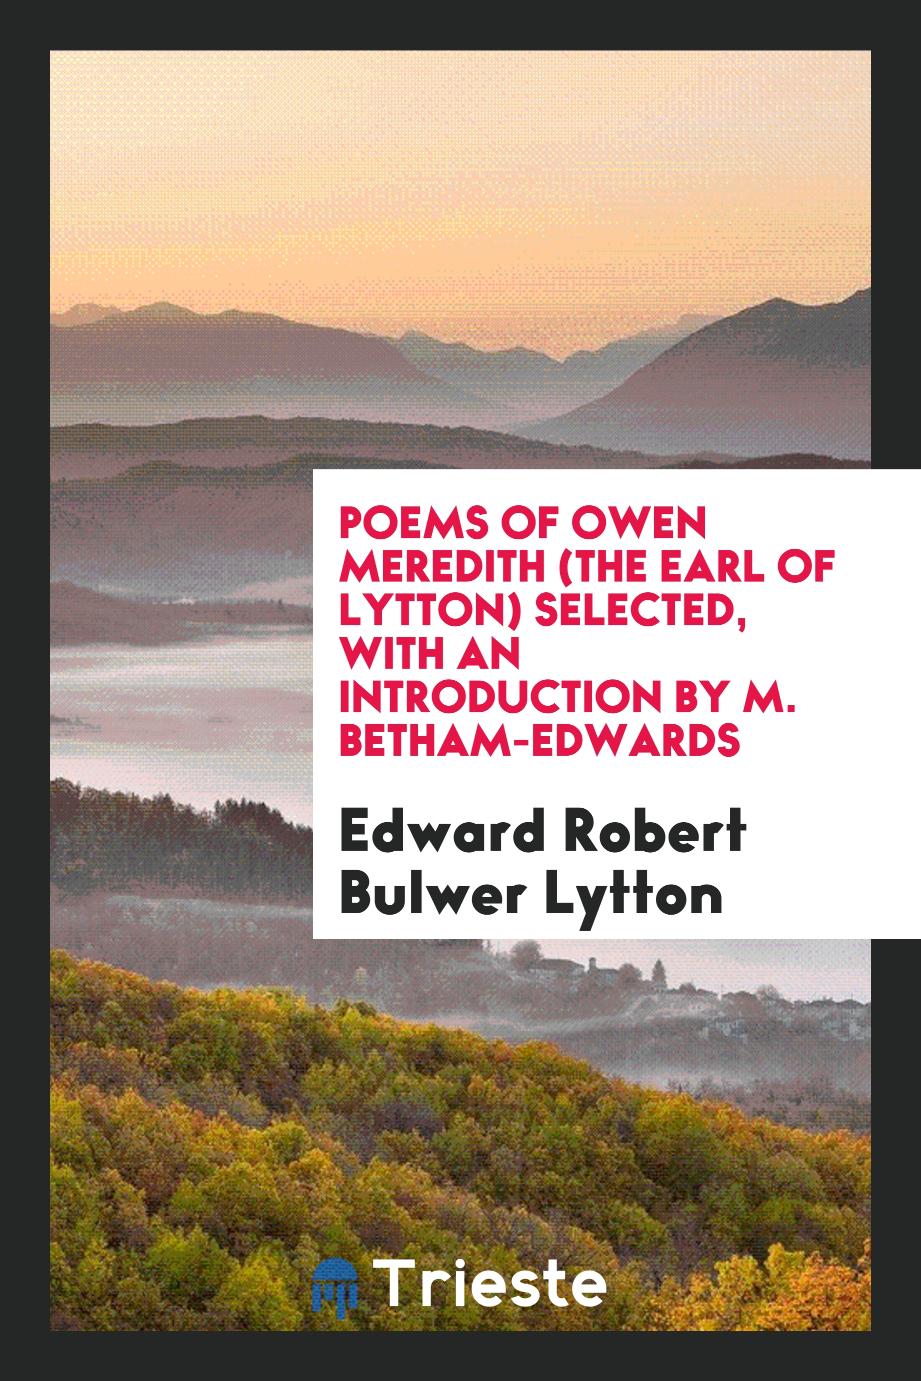 Poems of Owen Meredith (the earl of Lytton) Selected, with an introduction by M. Betham-Edwards